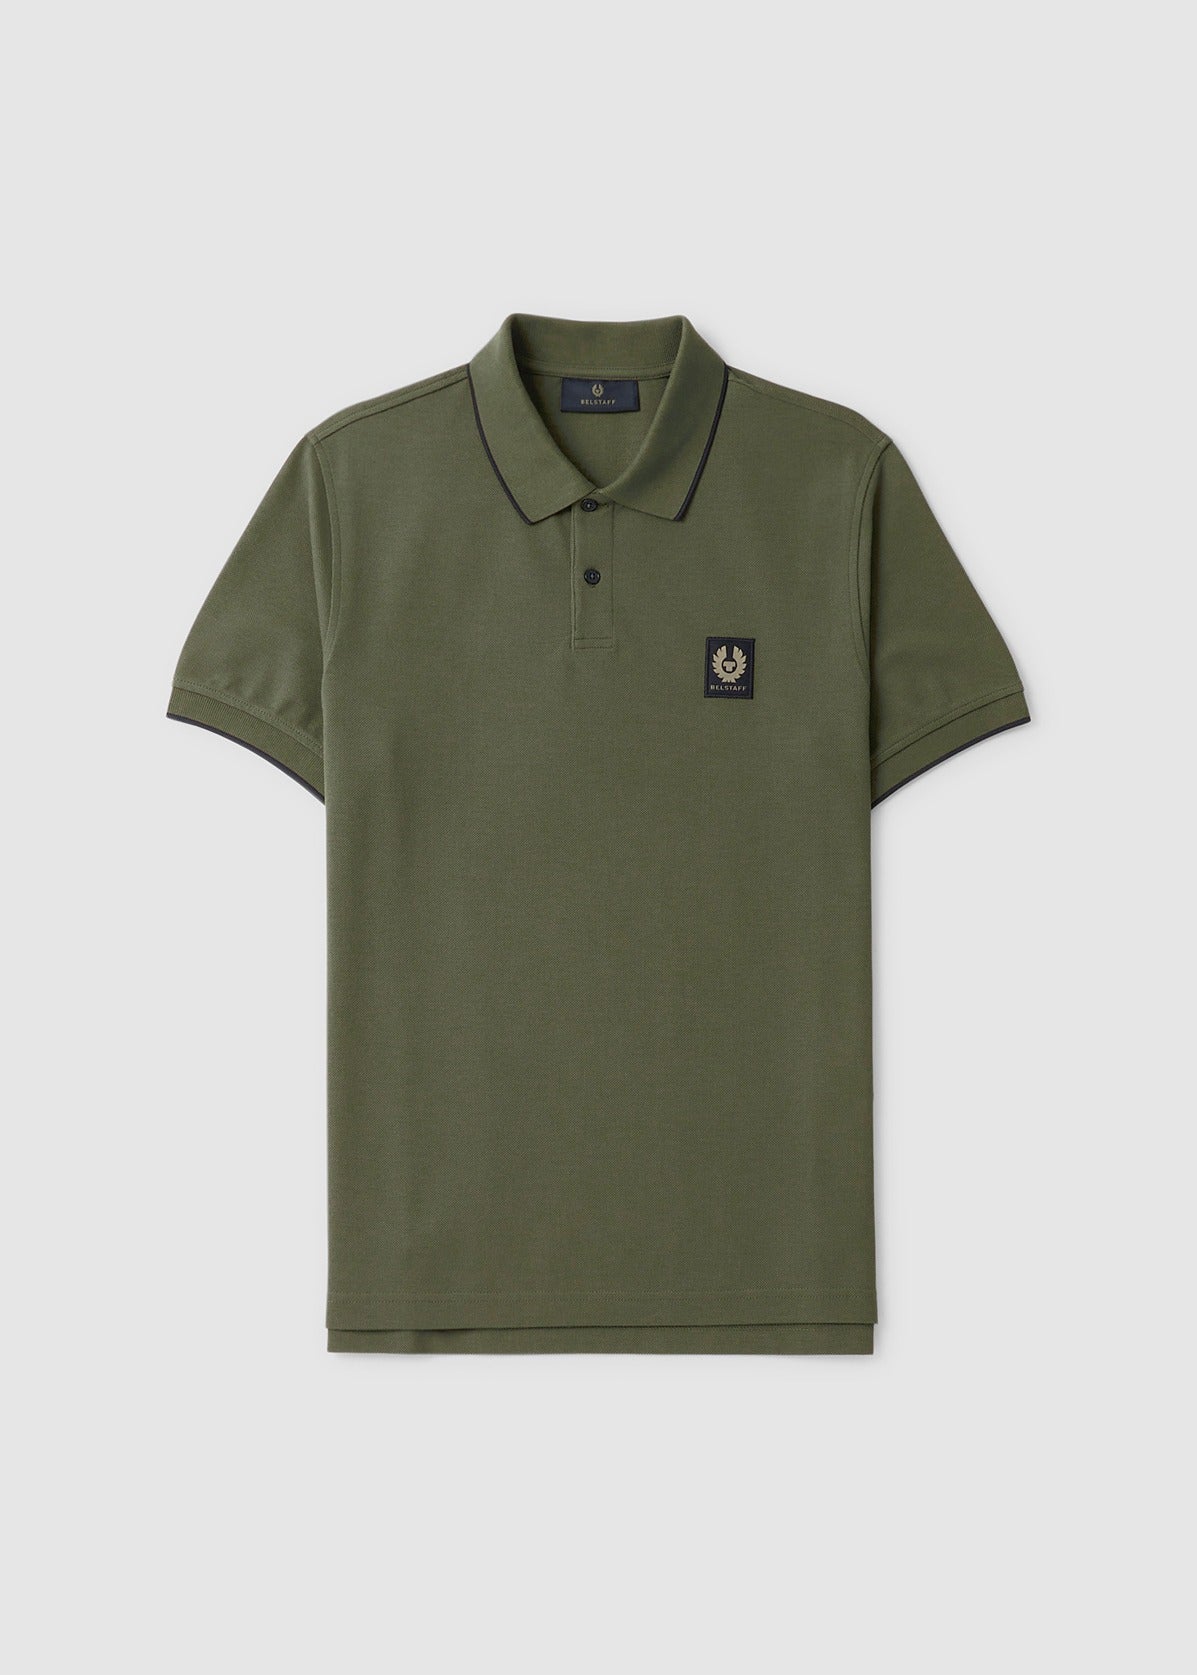 Image of Belstaff Mens Logo Tipped Poloshirt In True Olive